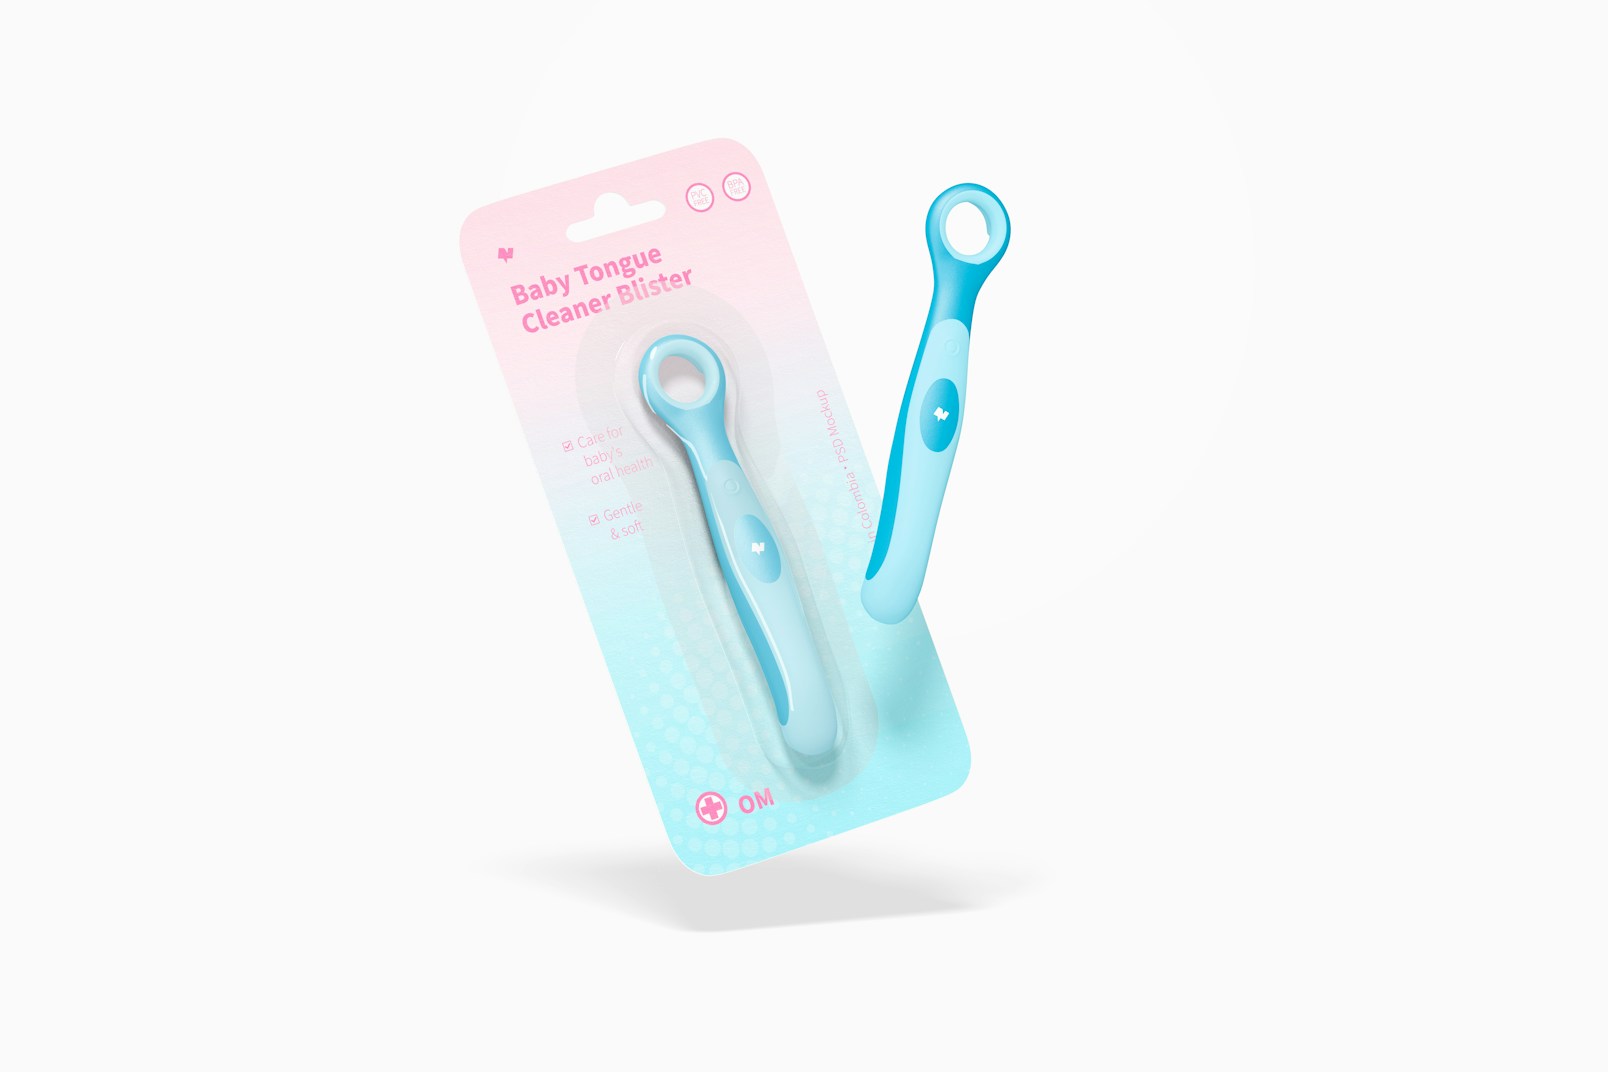 Baby Tongue Cleaner Blister Mockup, Falling